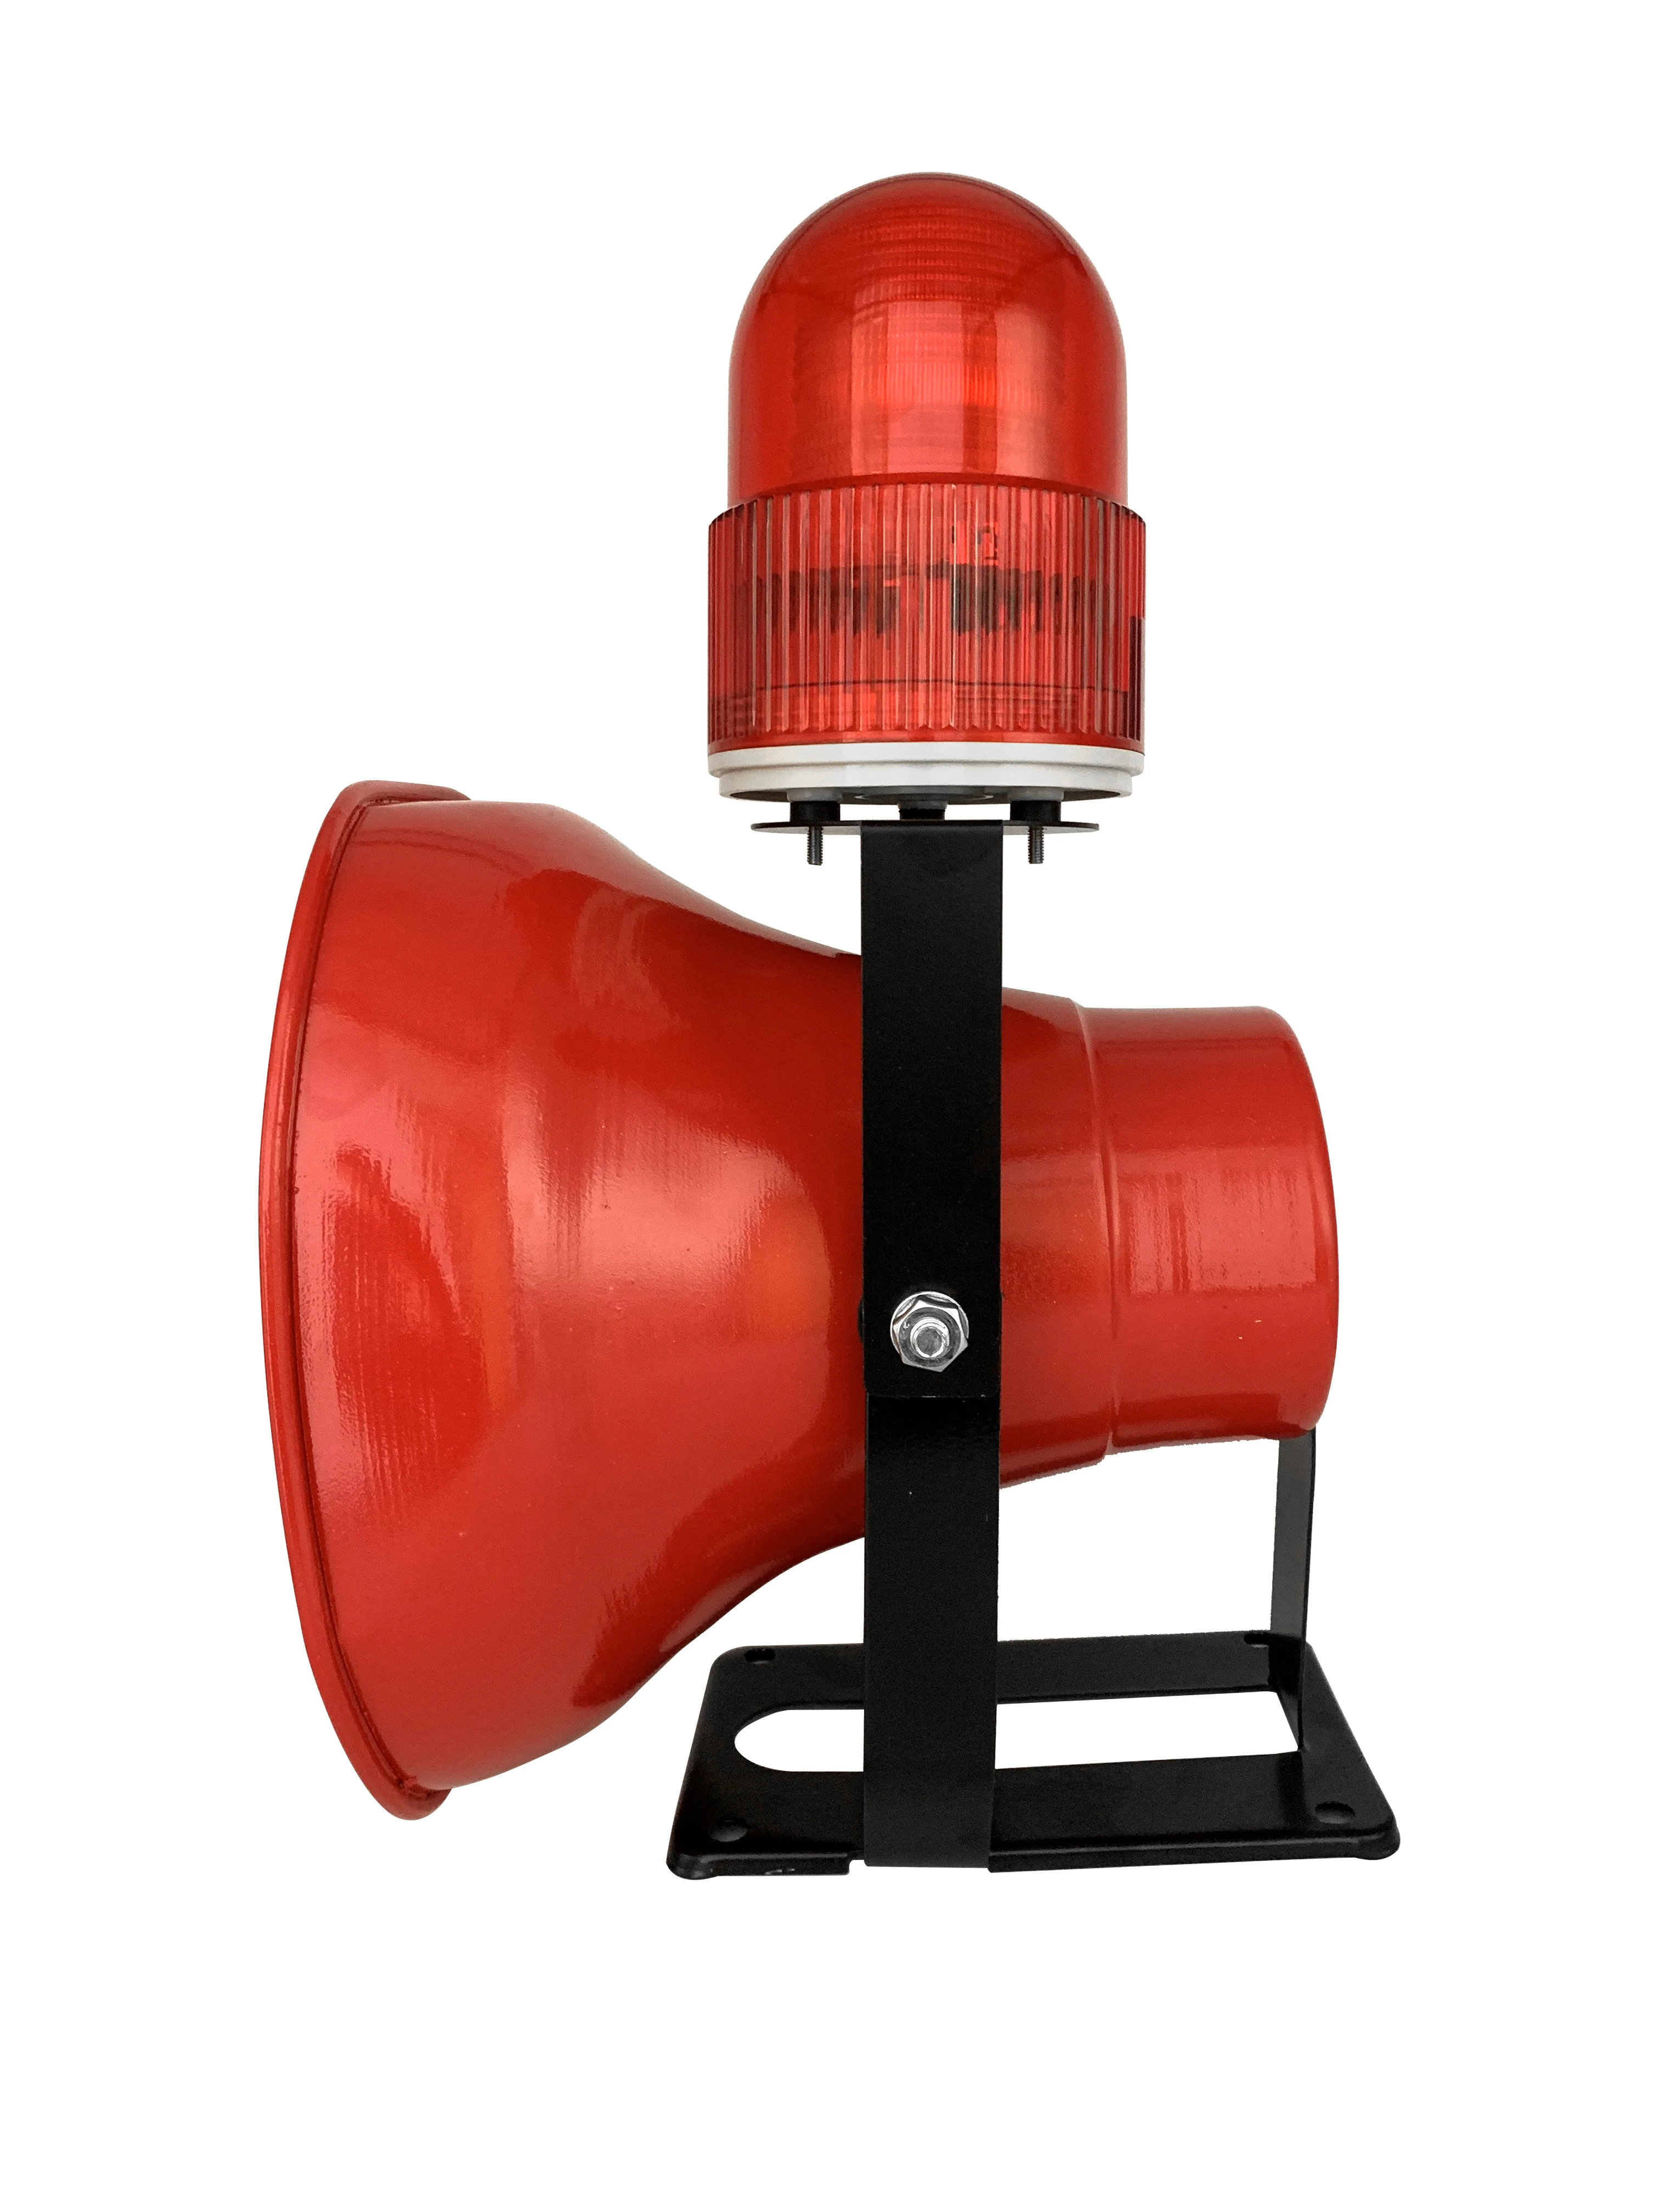 50W High Power Acoustooptic Voice Alarm with Strobe for Driving Crane School Fire Industrial Horn Siren Voice Horn(RED)